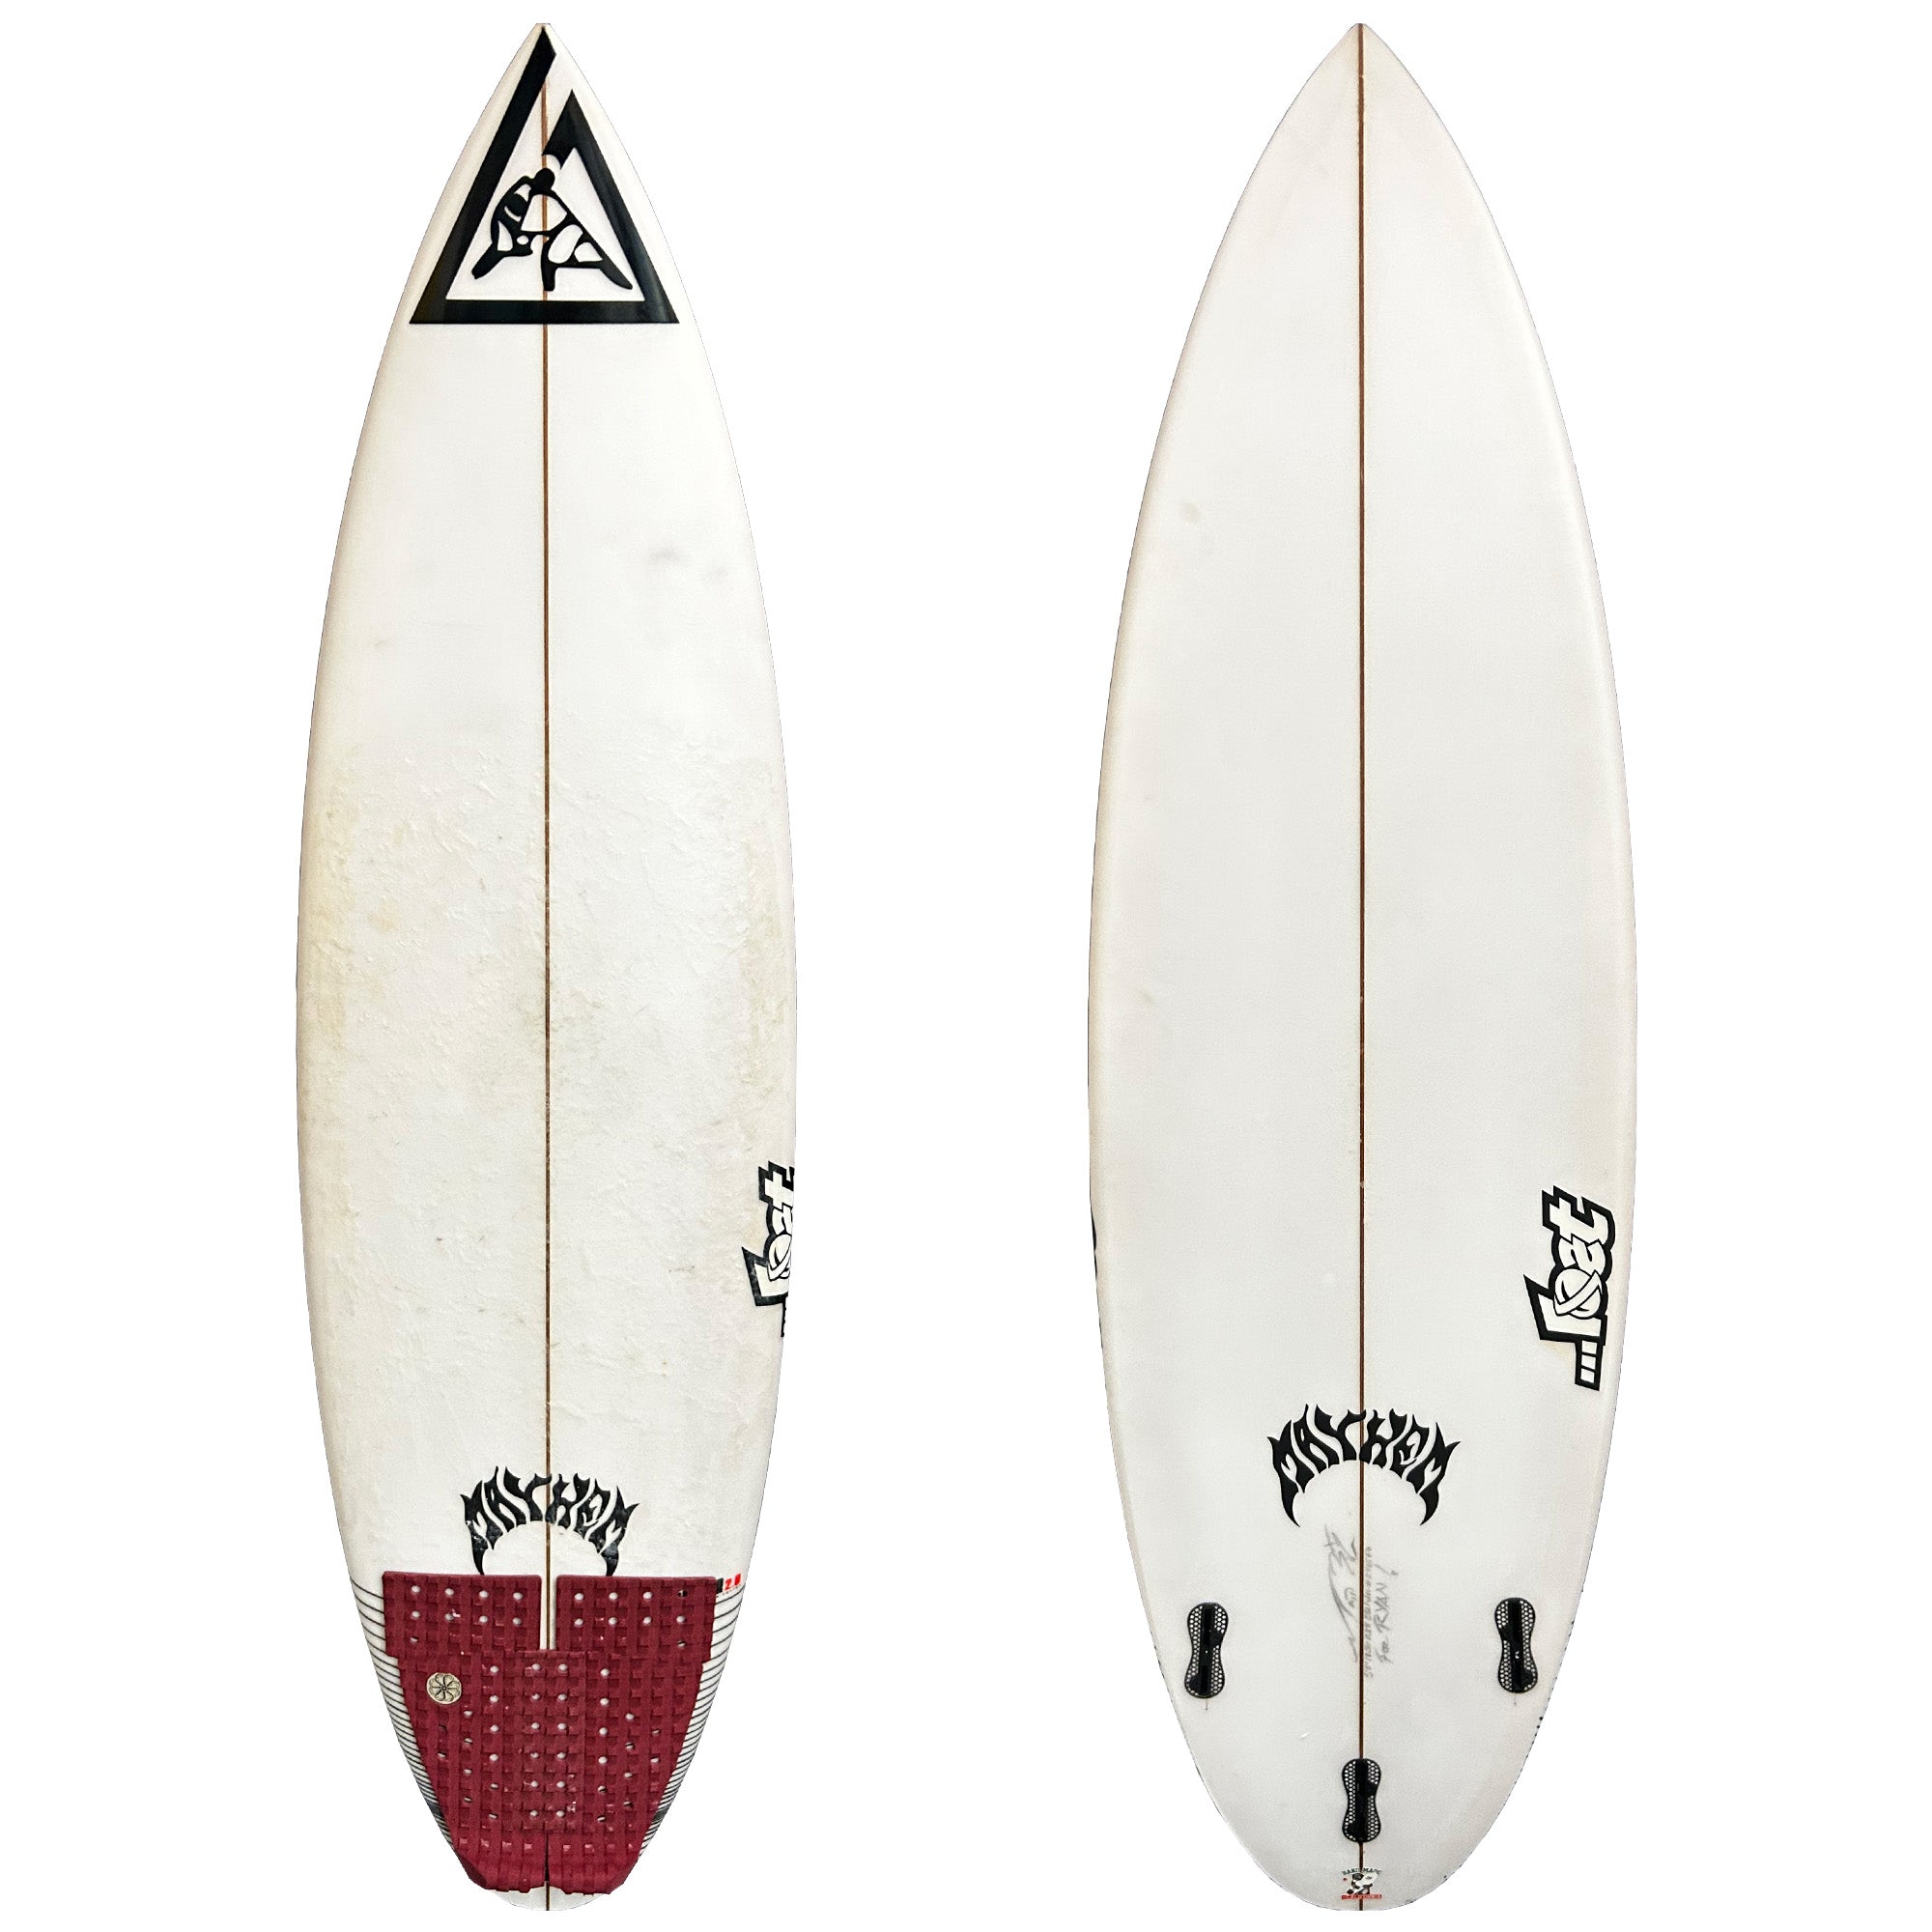 Lost Driver 2.0 5'8 Consignment Surfboard